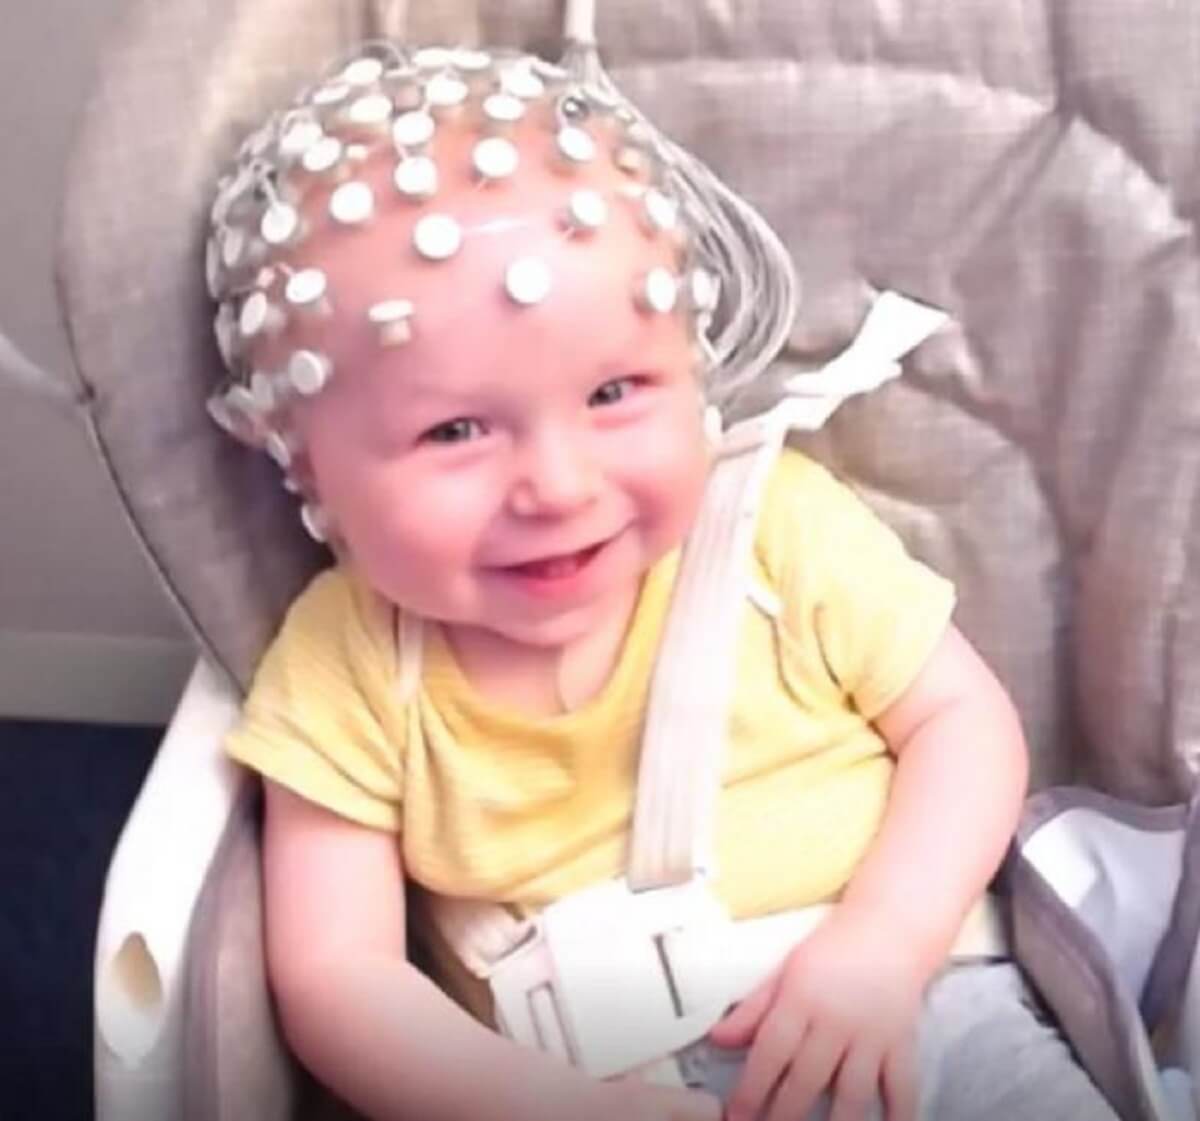 Infant electrical brain responses were recorded using a special headcap